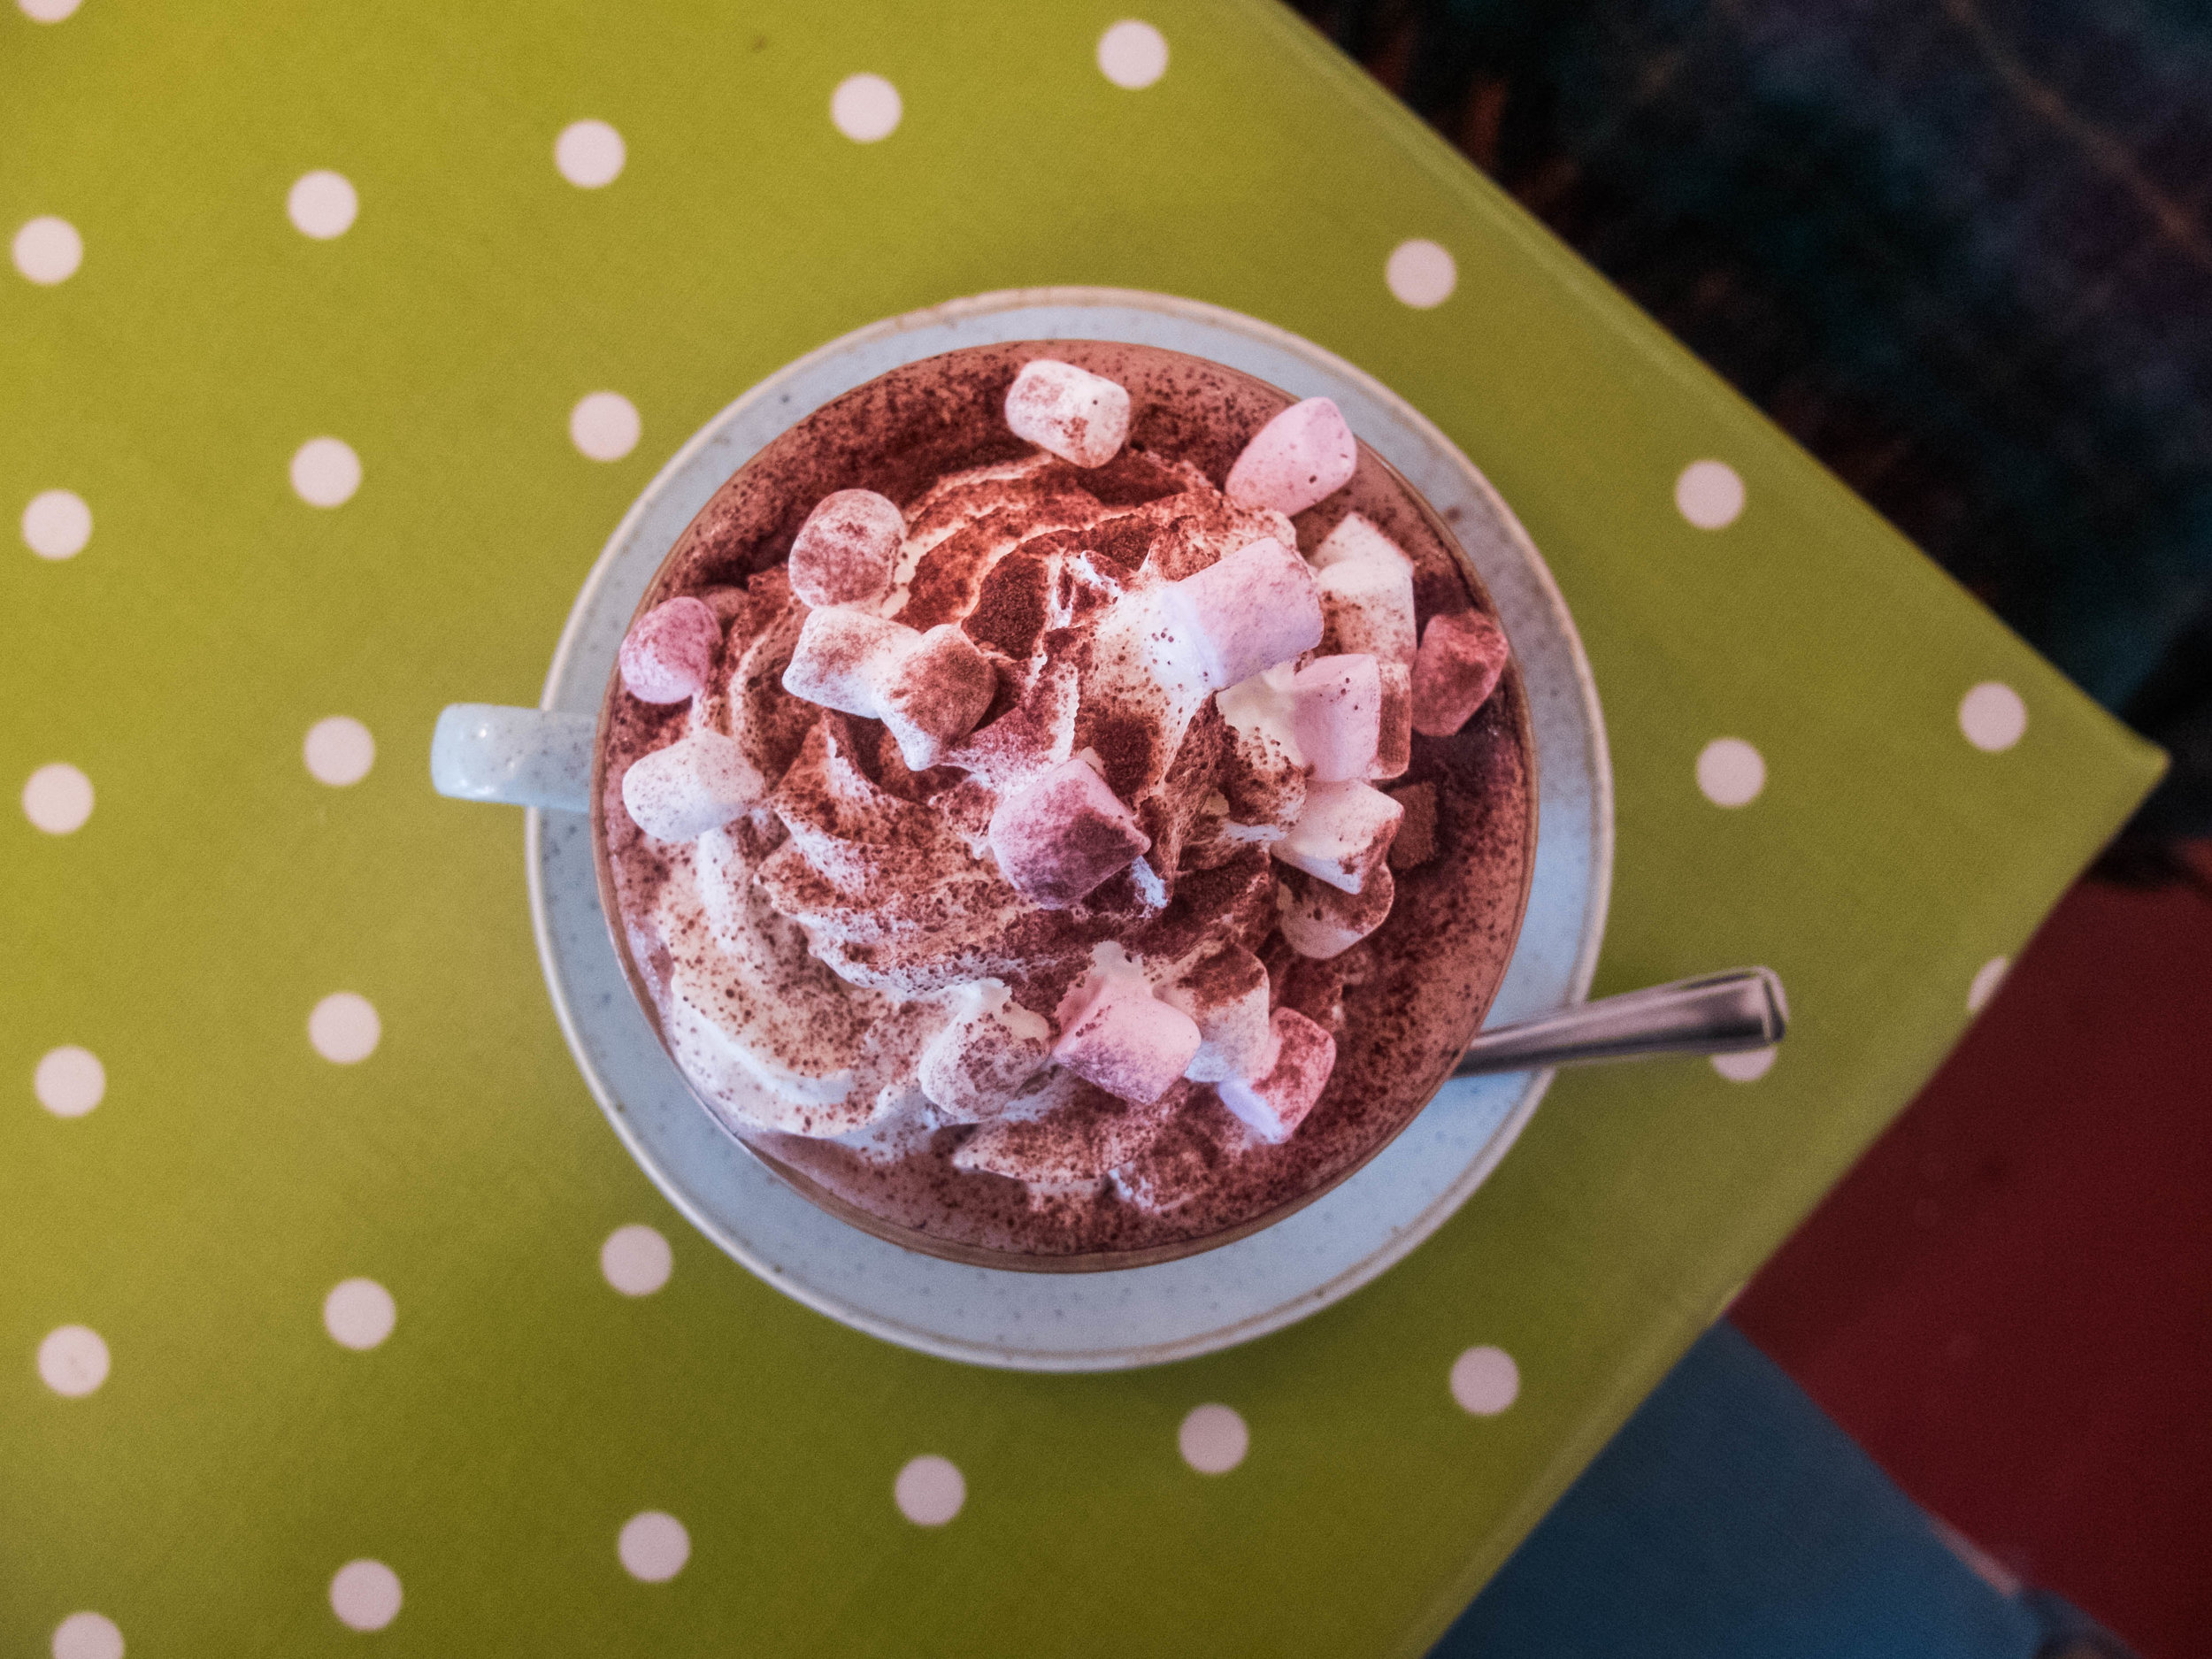  A cup of hot chocolate topped with marshmallows and whipped cream and dusted with chocolate powder 